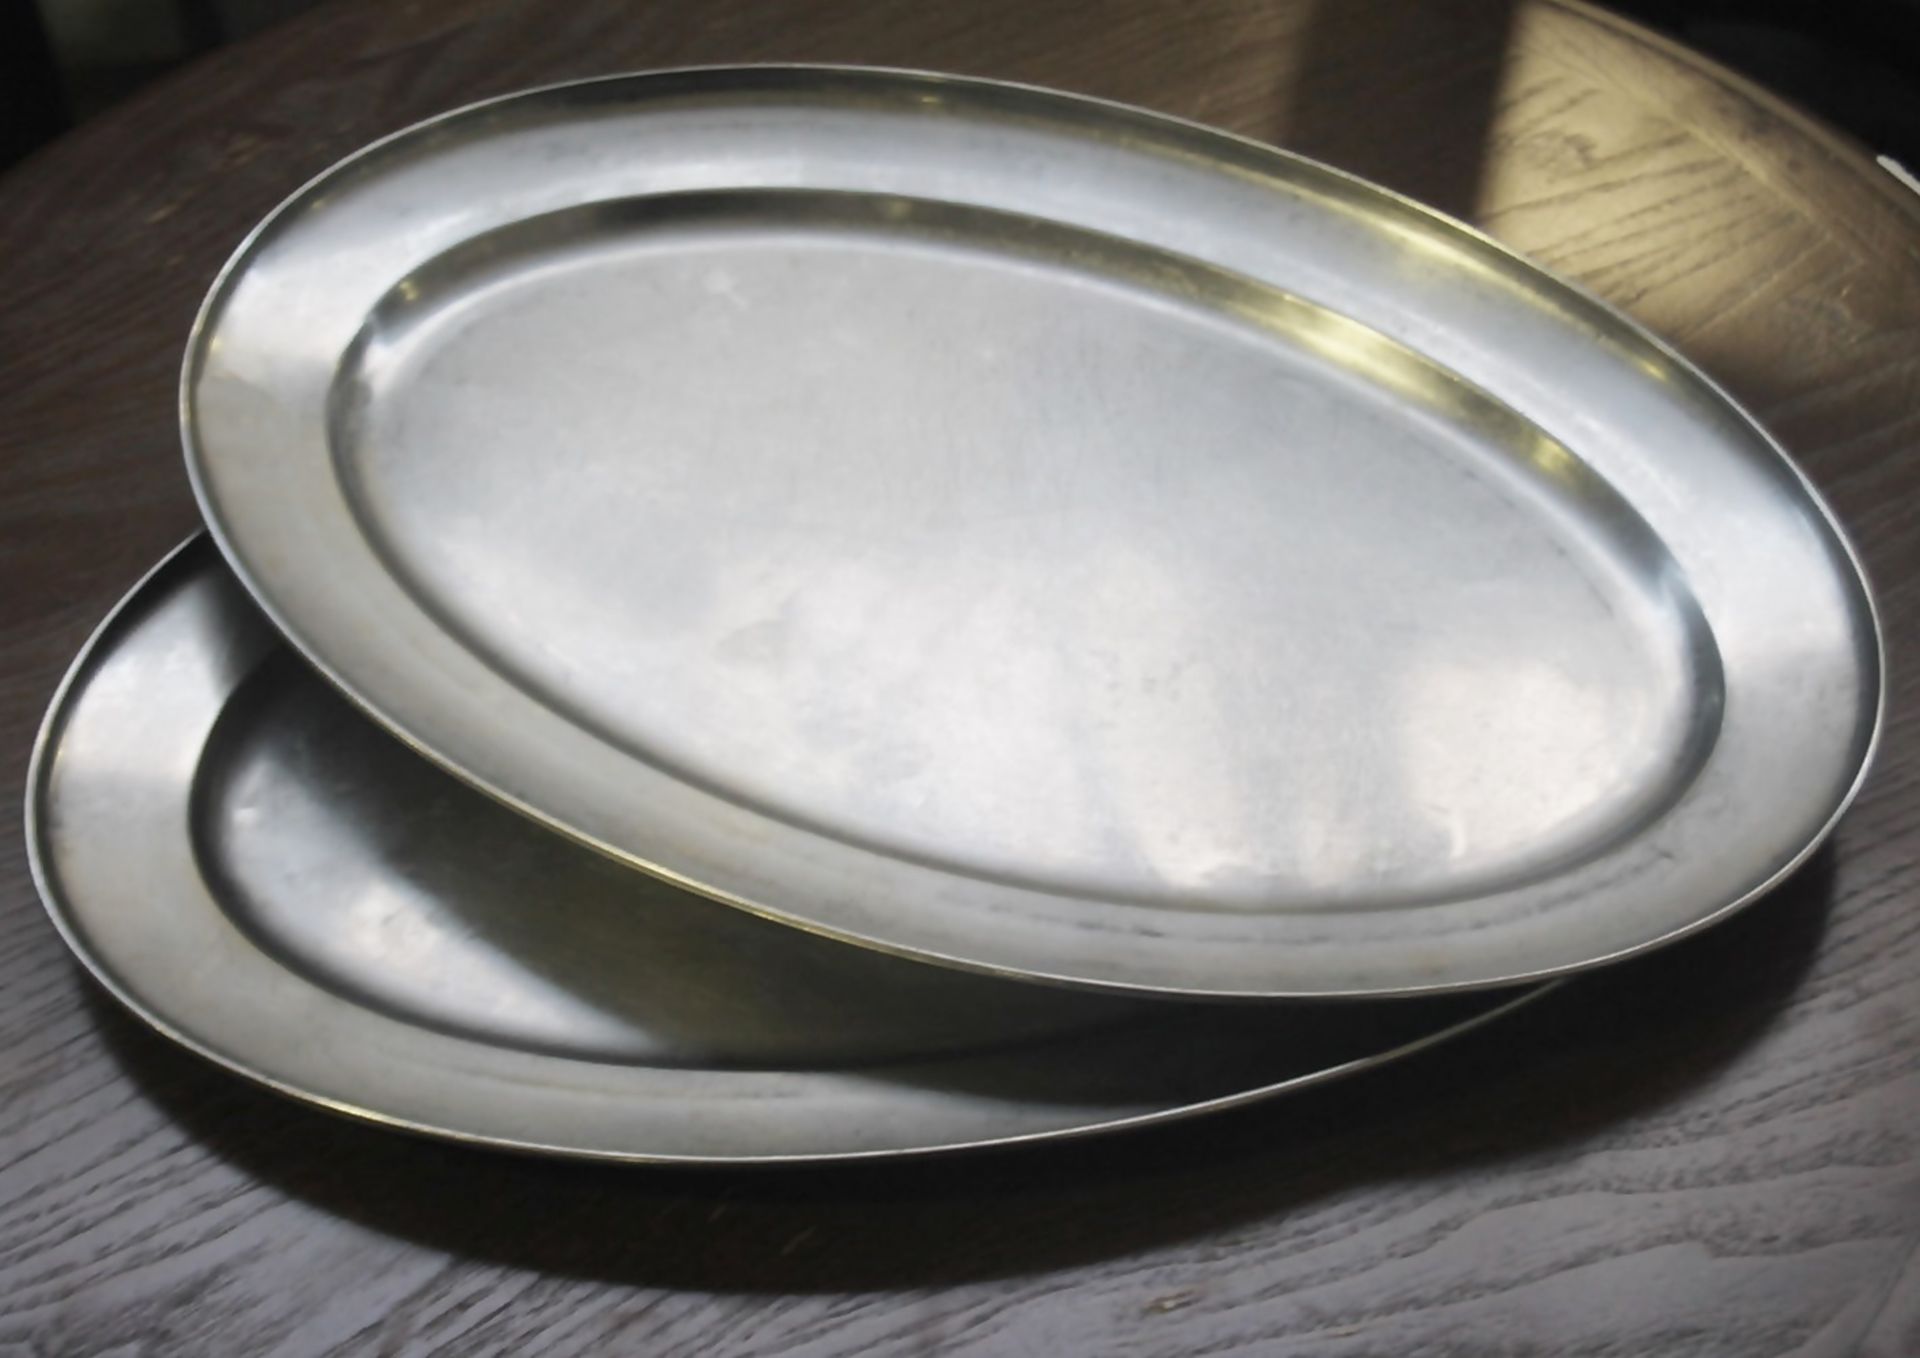 50 x Stainless Steel Oval Restaurant Serving Tray Platters - Dimensions (approx): 45 x 29cm - - Image 2 of 4